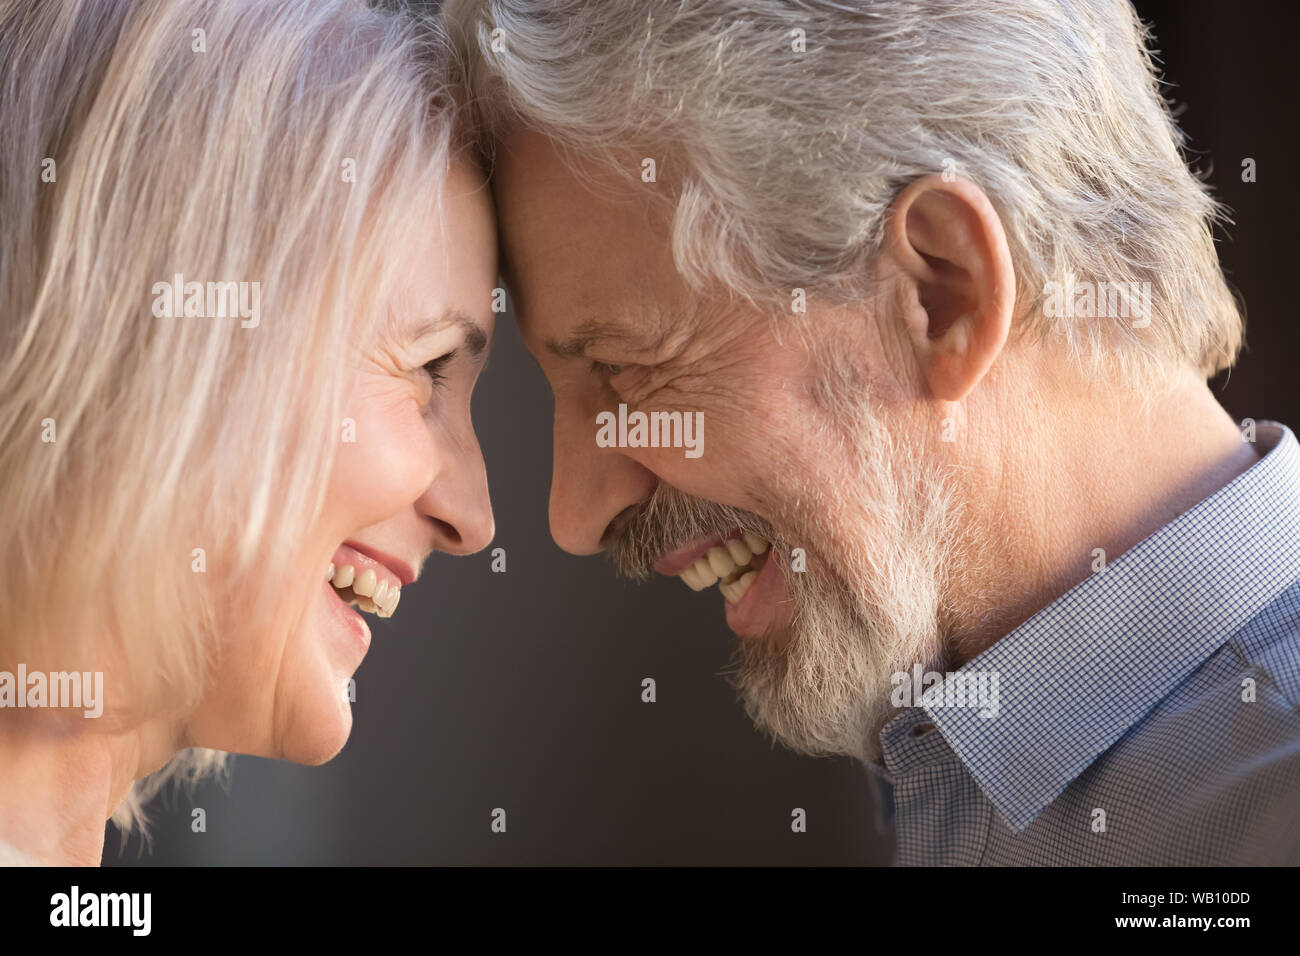 Happy old couple bonding touching foreheads laughing, closeup side view Stock Photo